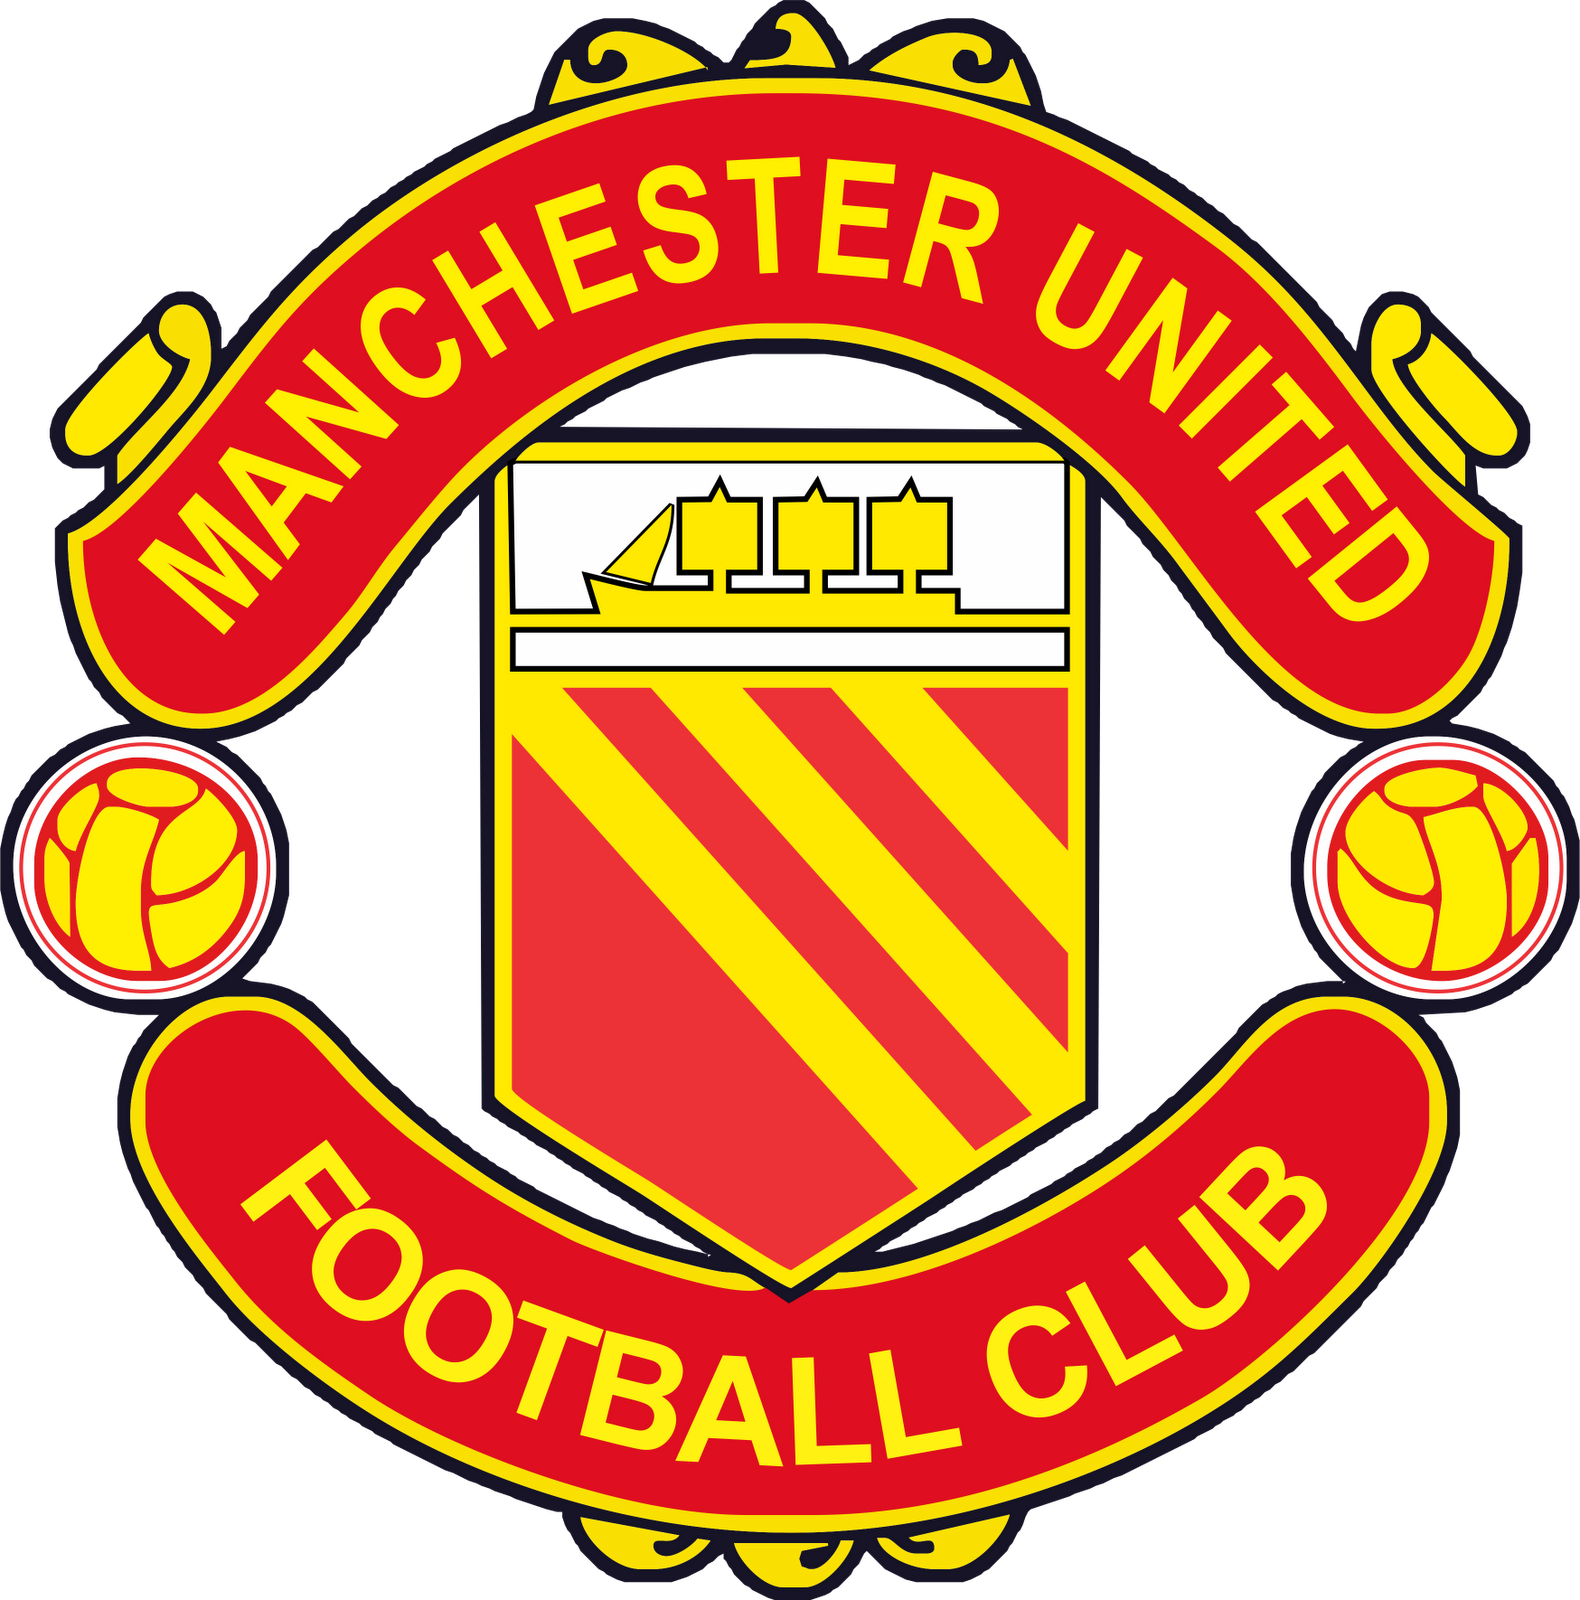 Manchester United Logo PNG Image, Football Club Free Download Transparent PNG Logos